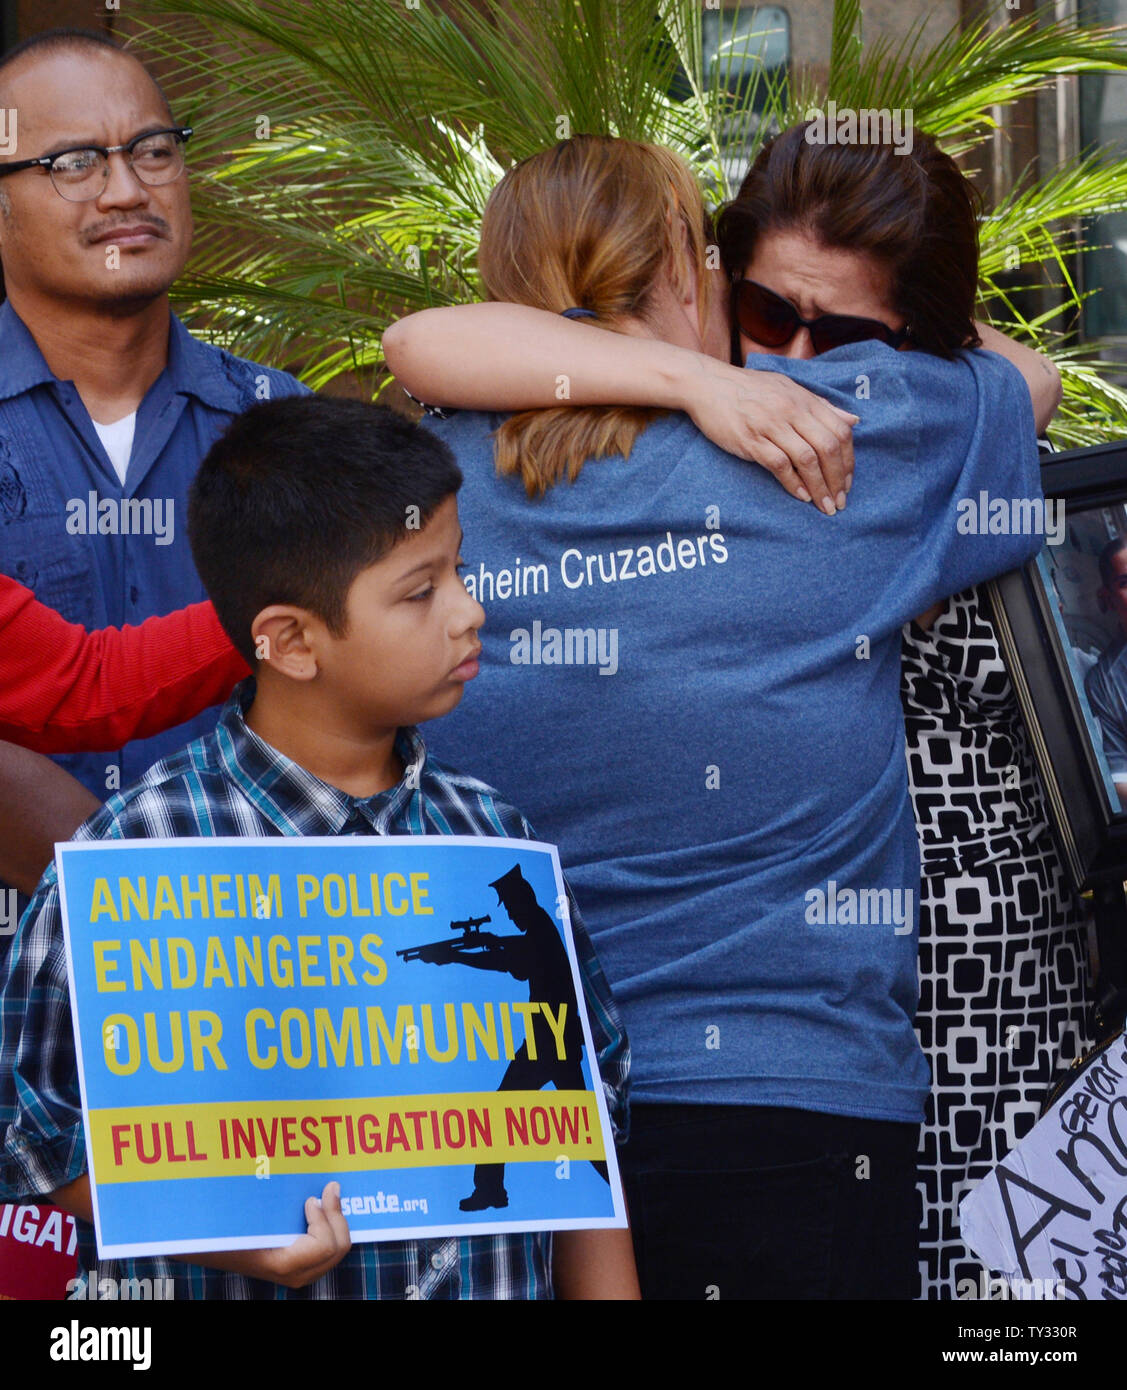 Corie Cline (C) and Barbara Padilla hug during a news conference outside state Attorney General Kamala Harris' office in Los Angeles, California on July 30, 2012, before presenting a petition urging her to investigate Anaheim police over recent officer-involved shootings. Cline's brother Joe Whitehouse and Padilla's son Marcel Ceja were shot and killed by police in separate incidents.  UPI/Jim Ruymen Stock Photo